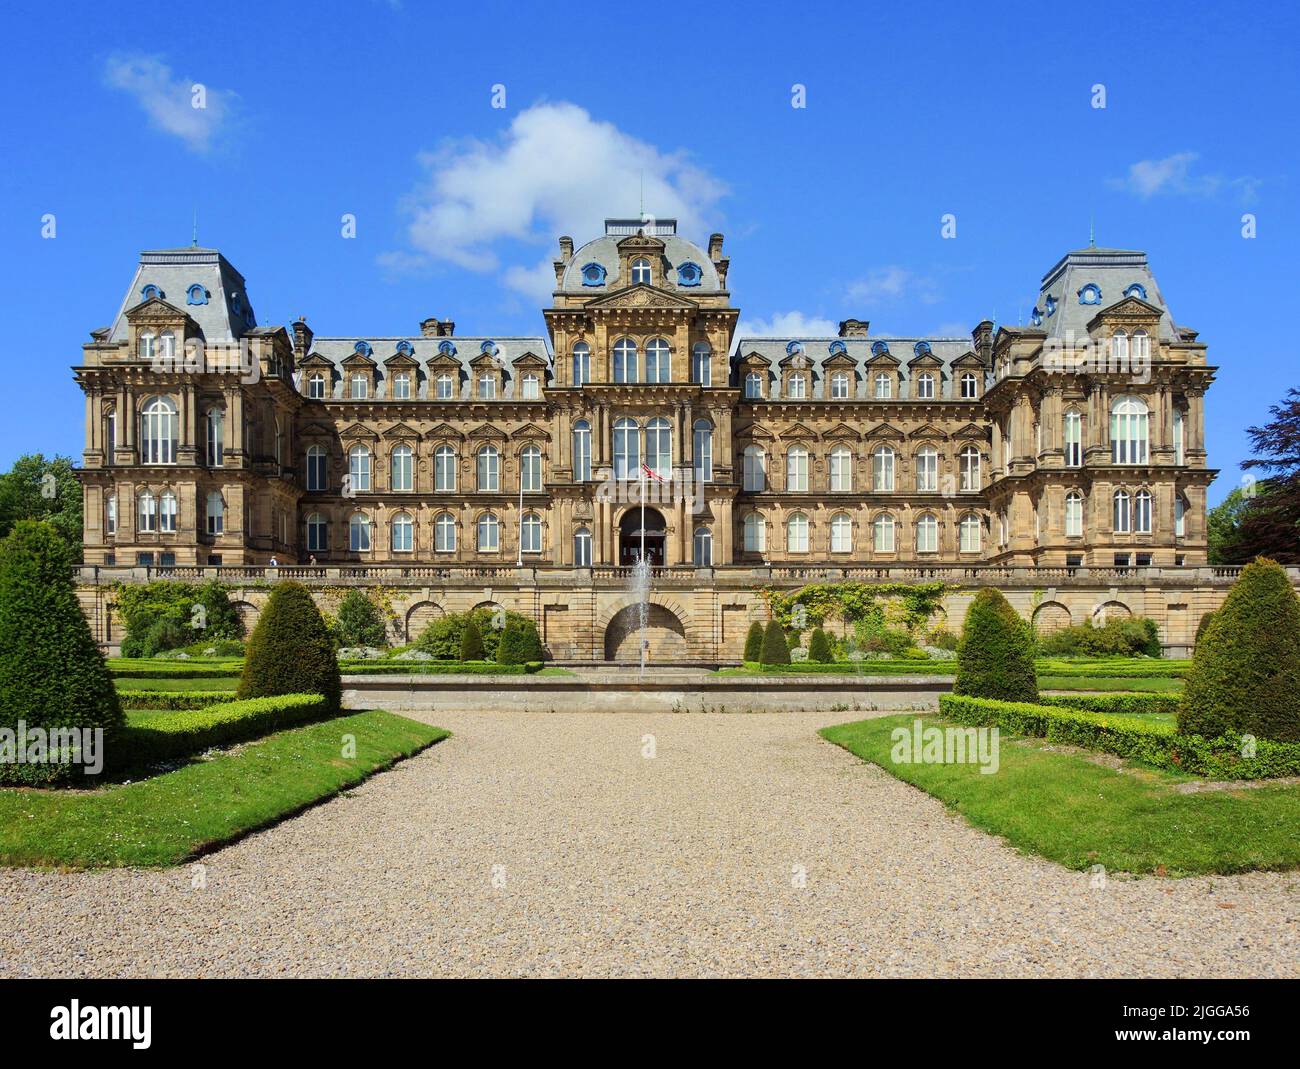 The Bowes Museum Exterior Stock Photo